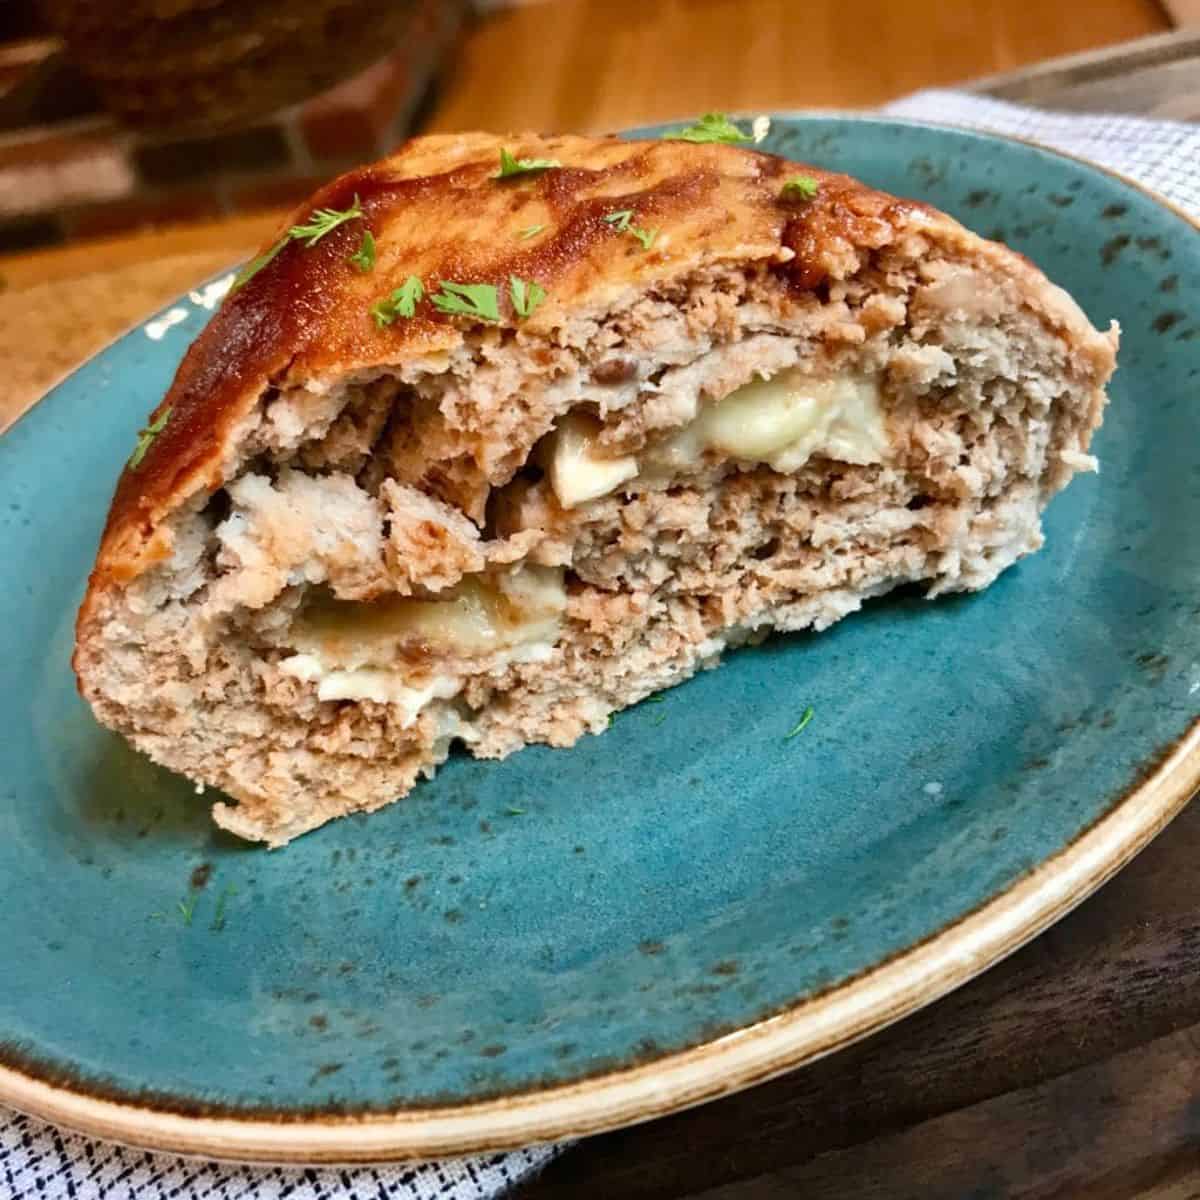 Cheese stuffed turkey meat loaf on a blue plate.